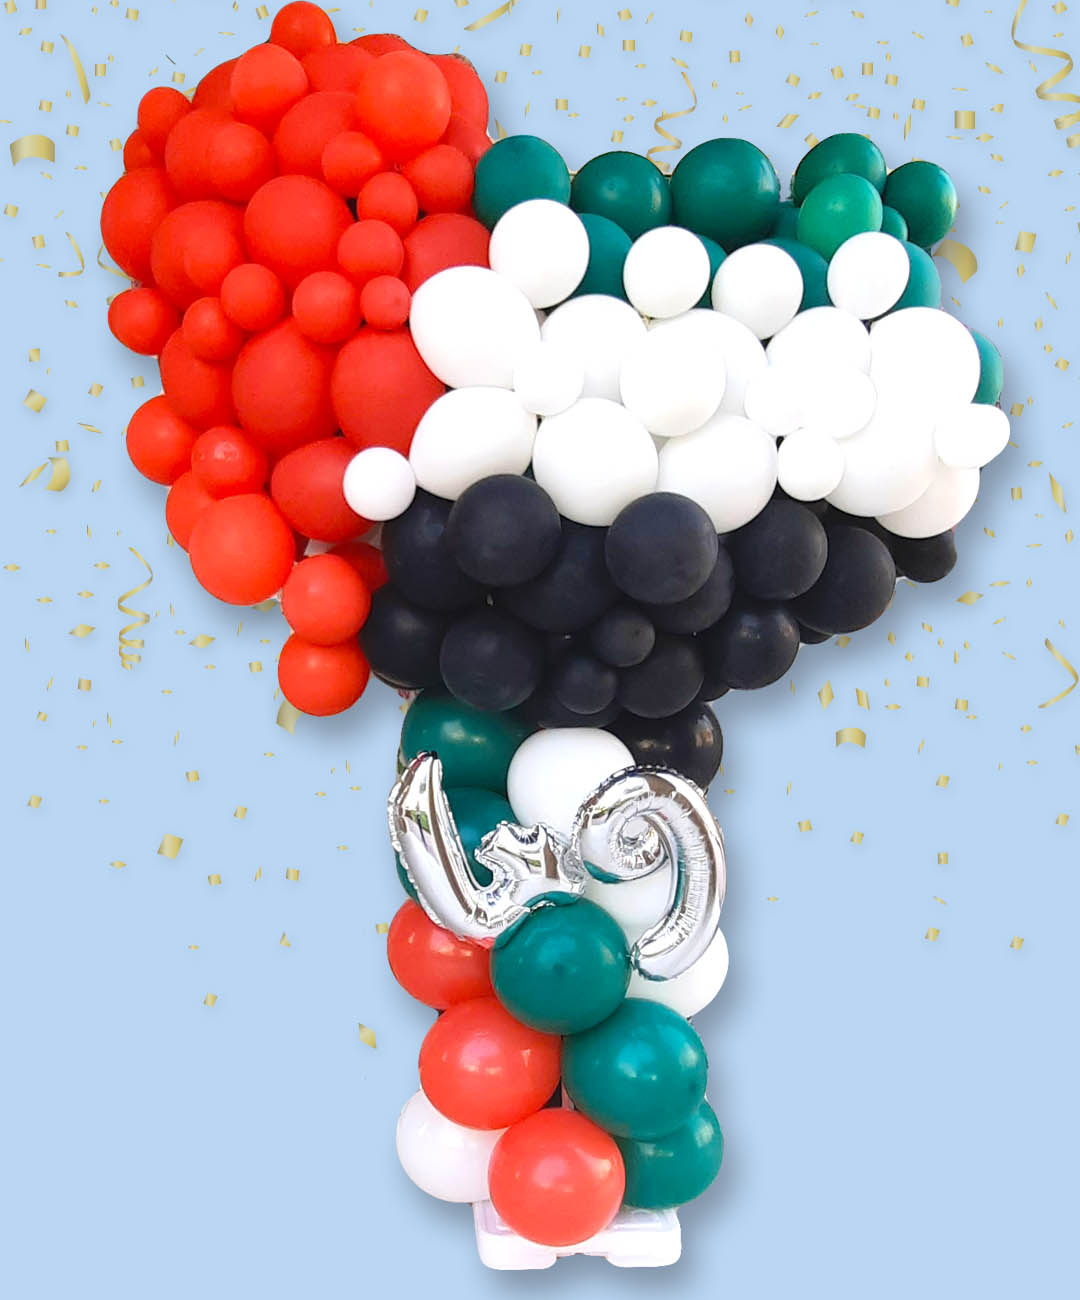 UAE National Day Heart Balloon Stand